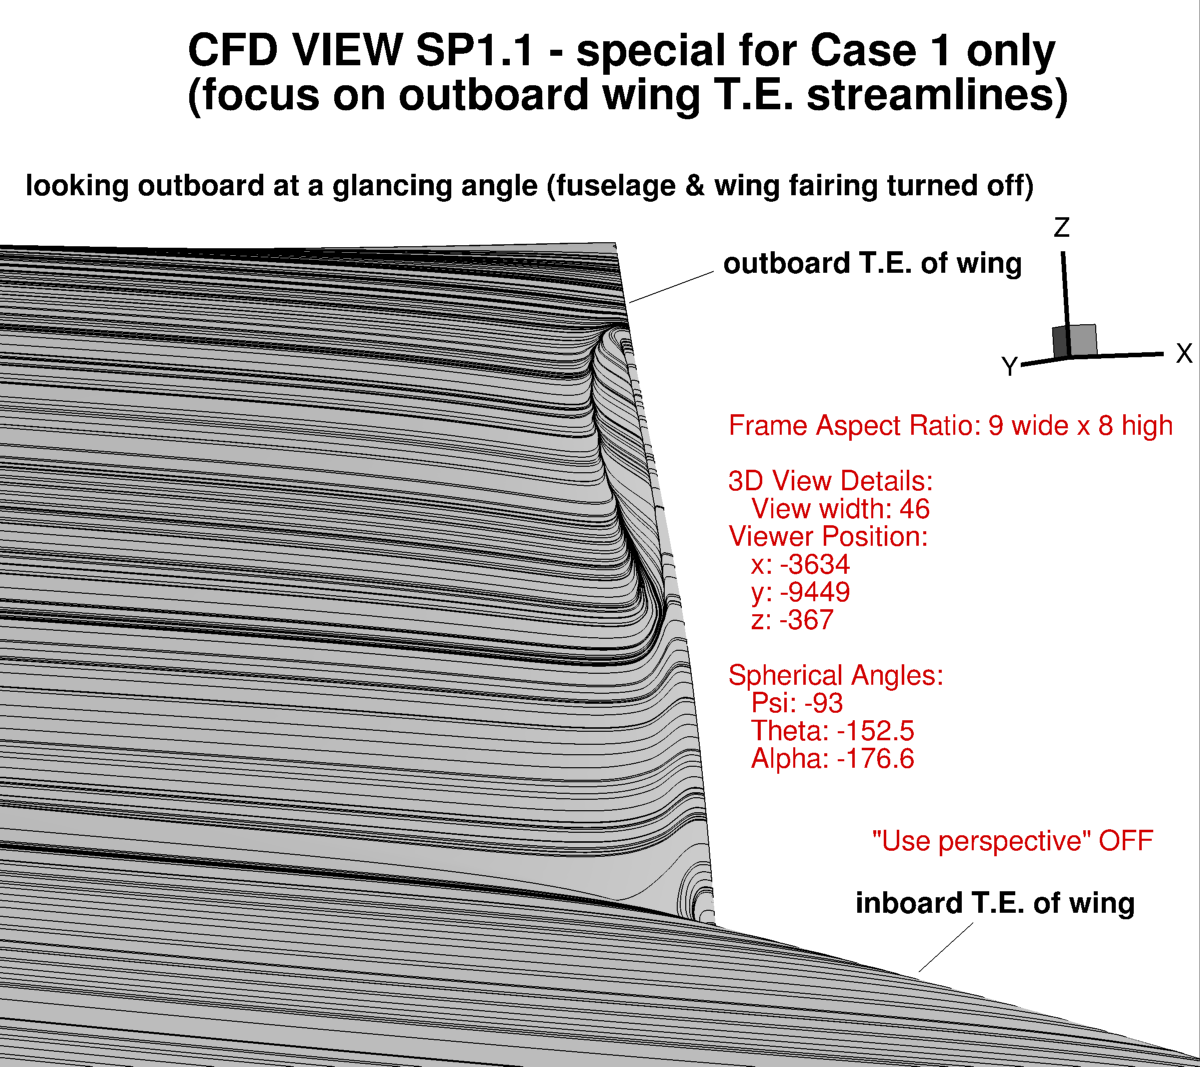 Example CFD view #SP1.1, special for Case 1